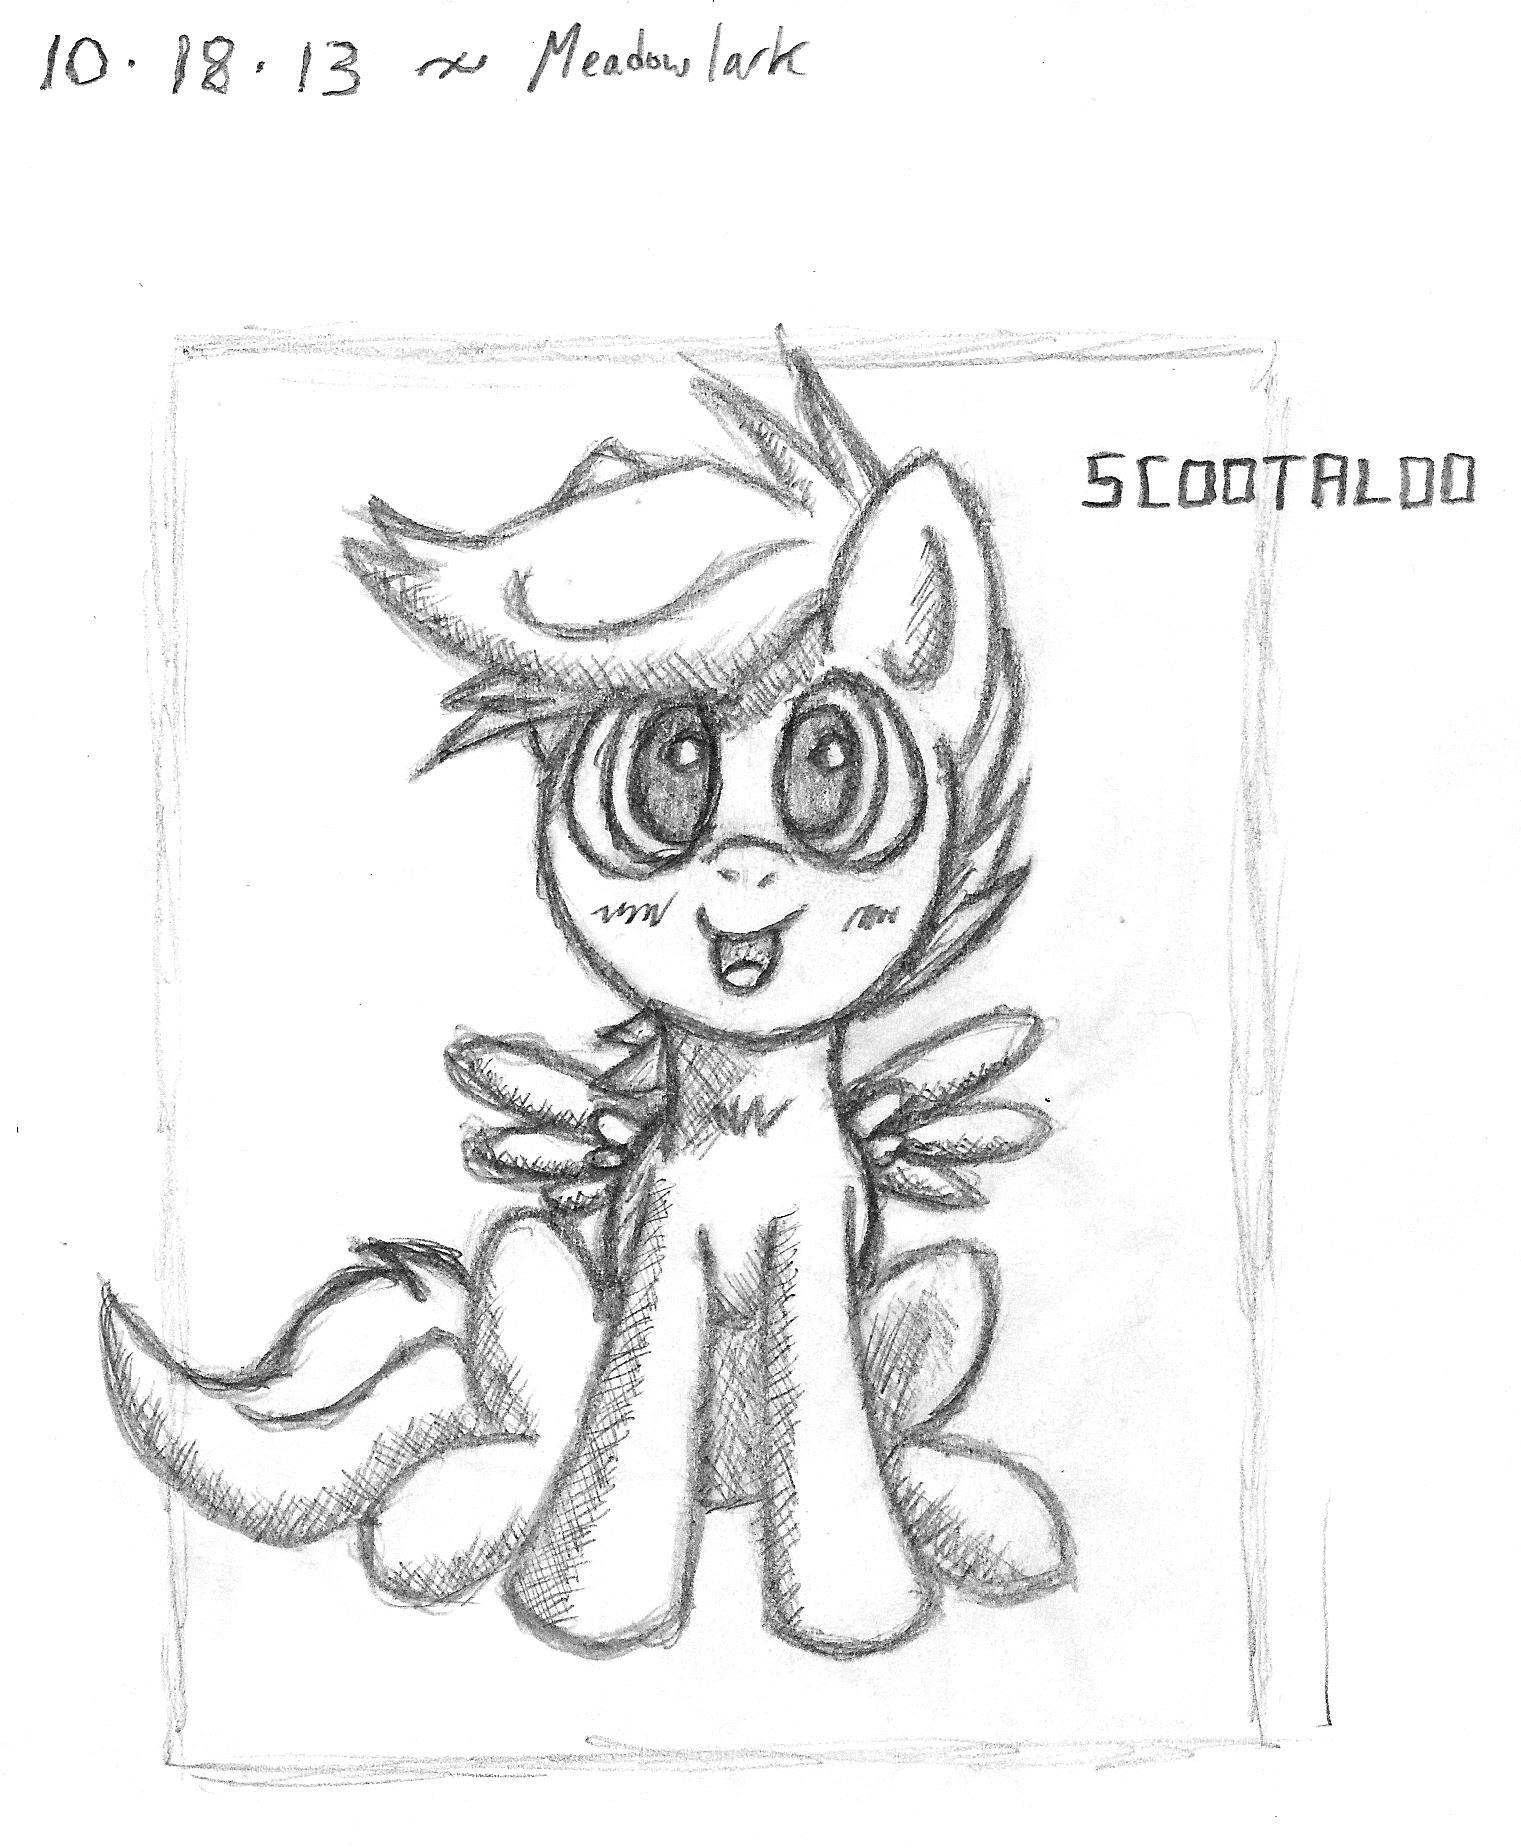 2013-10-18-Scootaloo, Attempt 01